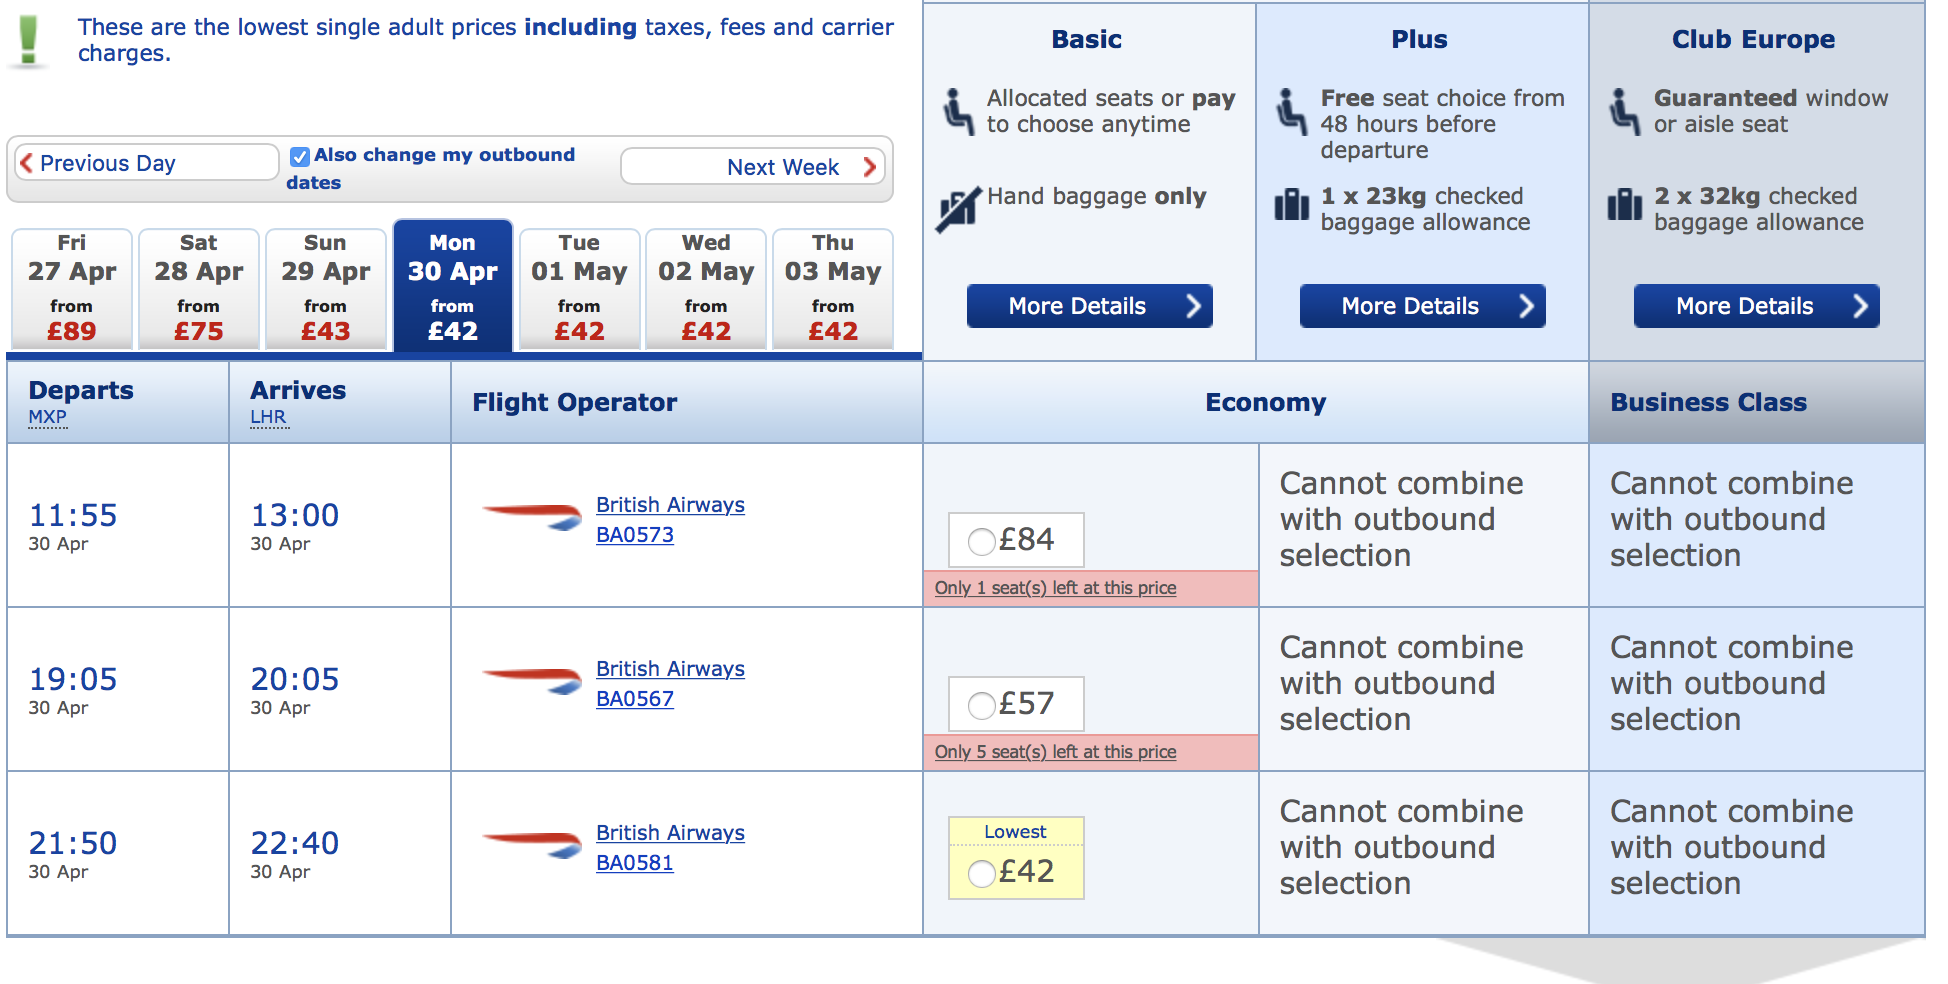 You Can Now Mix British Airways Basic and Plus Fares In A Single Booking